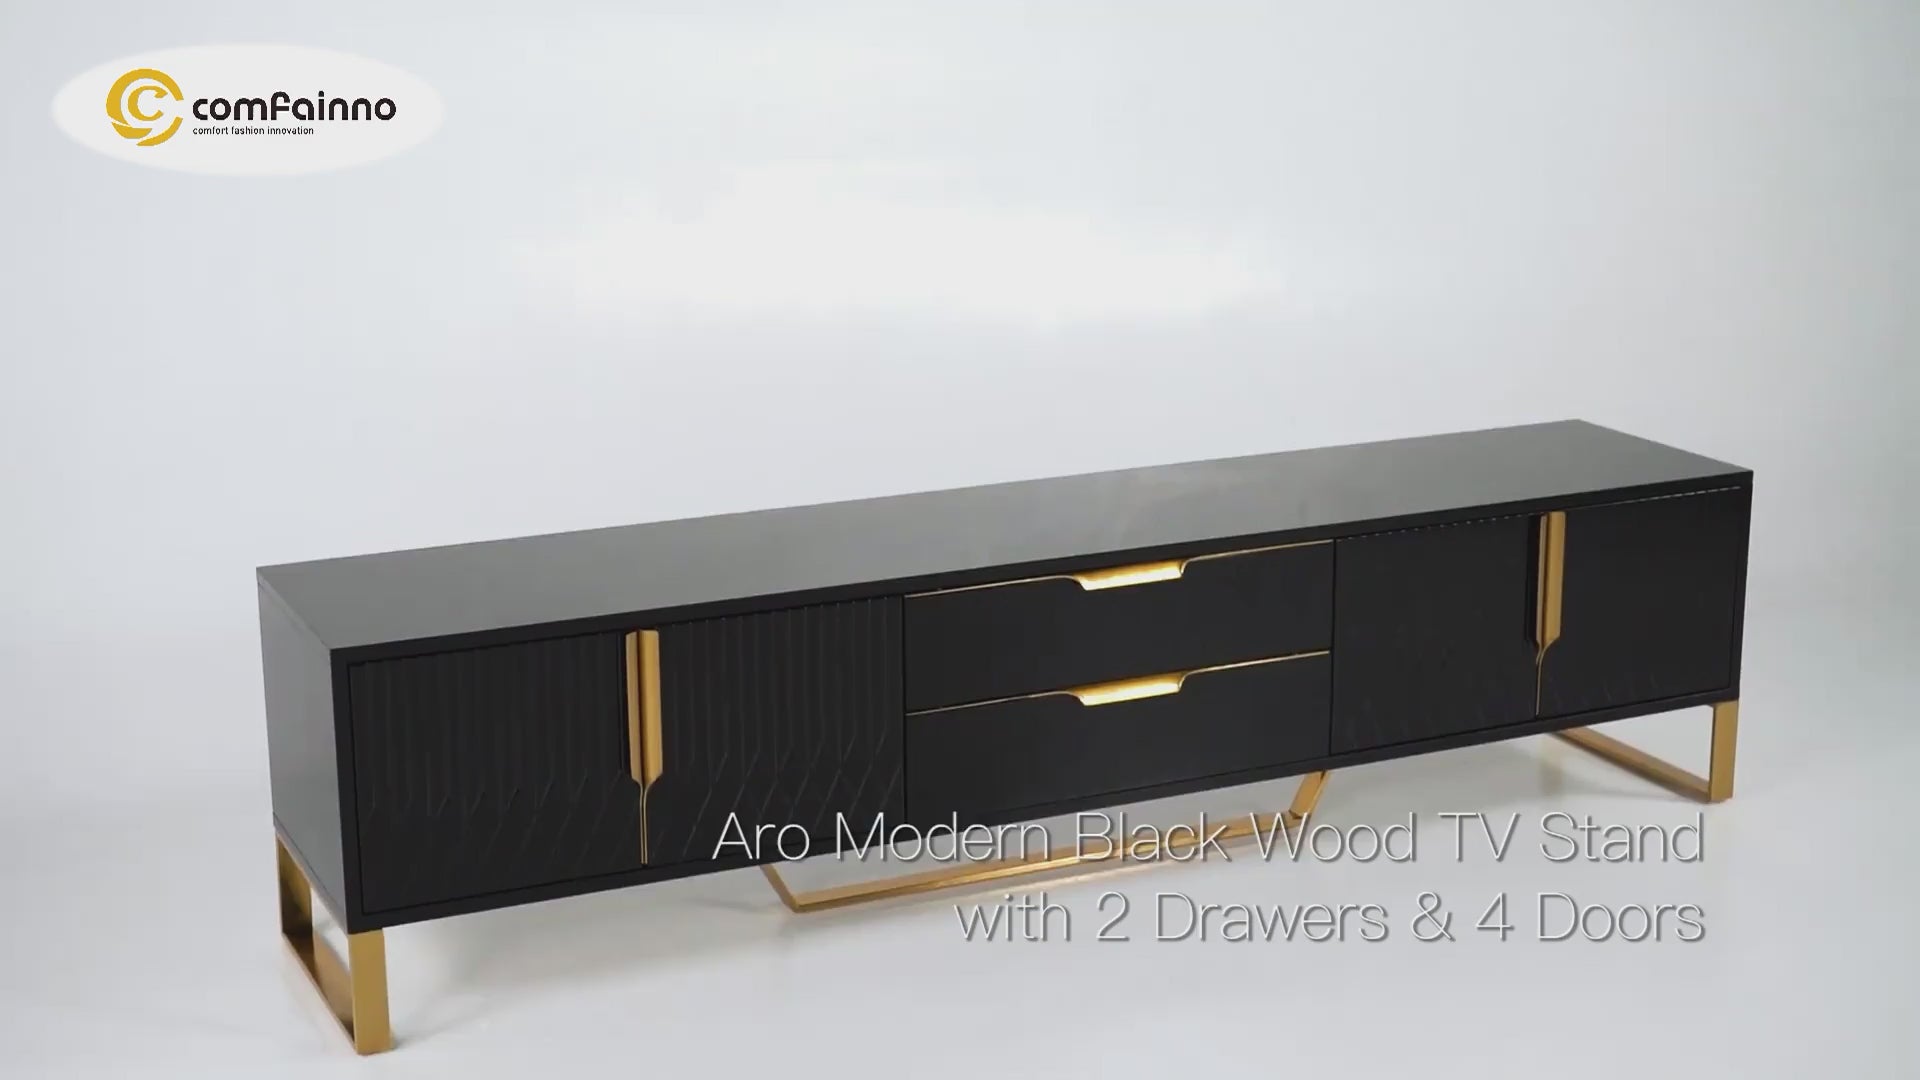 Aro Modern White Wood TV Stand with 2 Drawers & 4 Doors Small Media Console Black